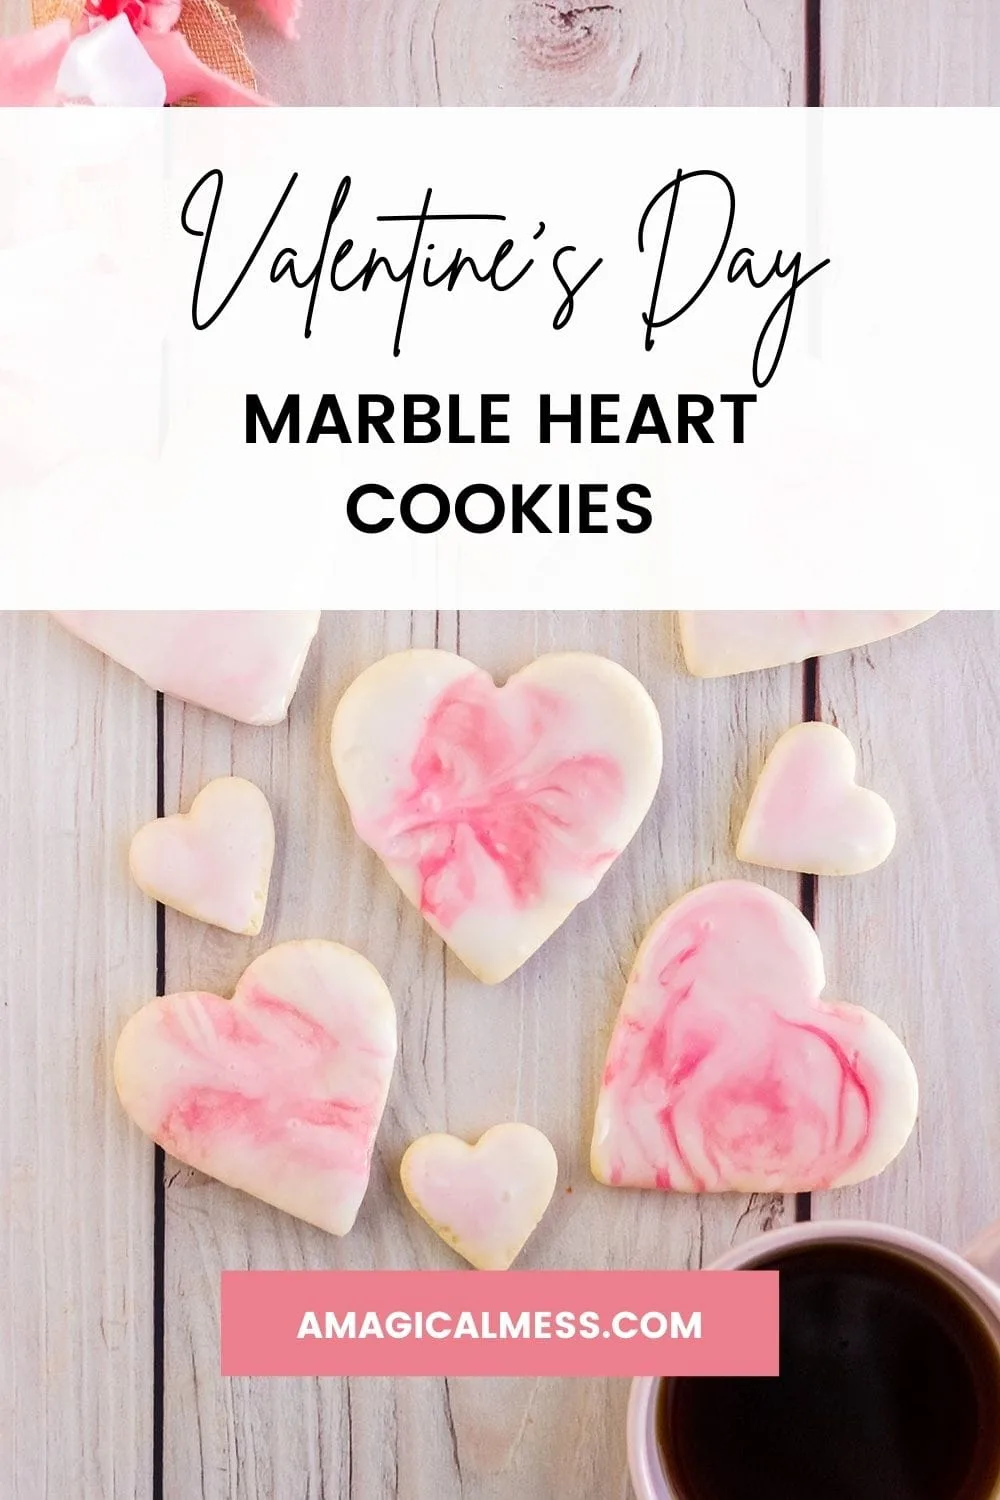 Heart cookies with pink marble icing.